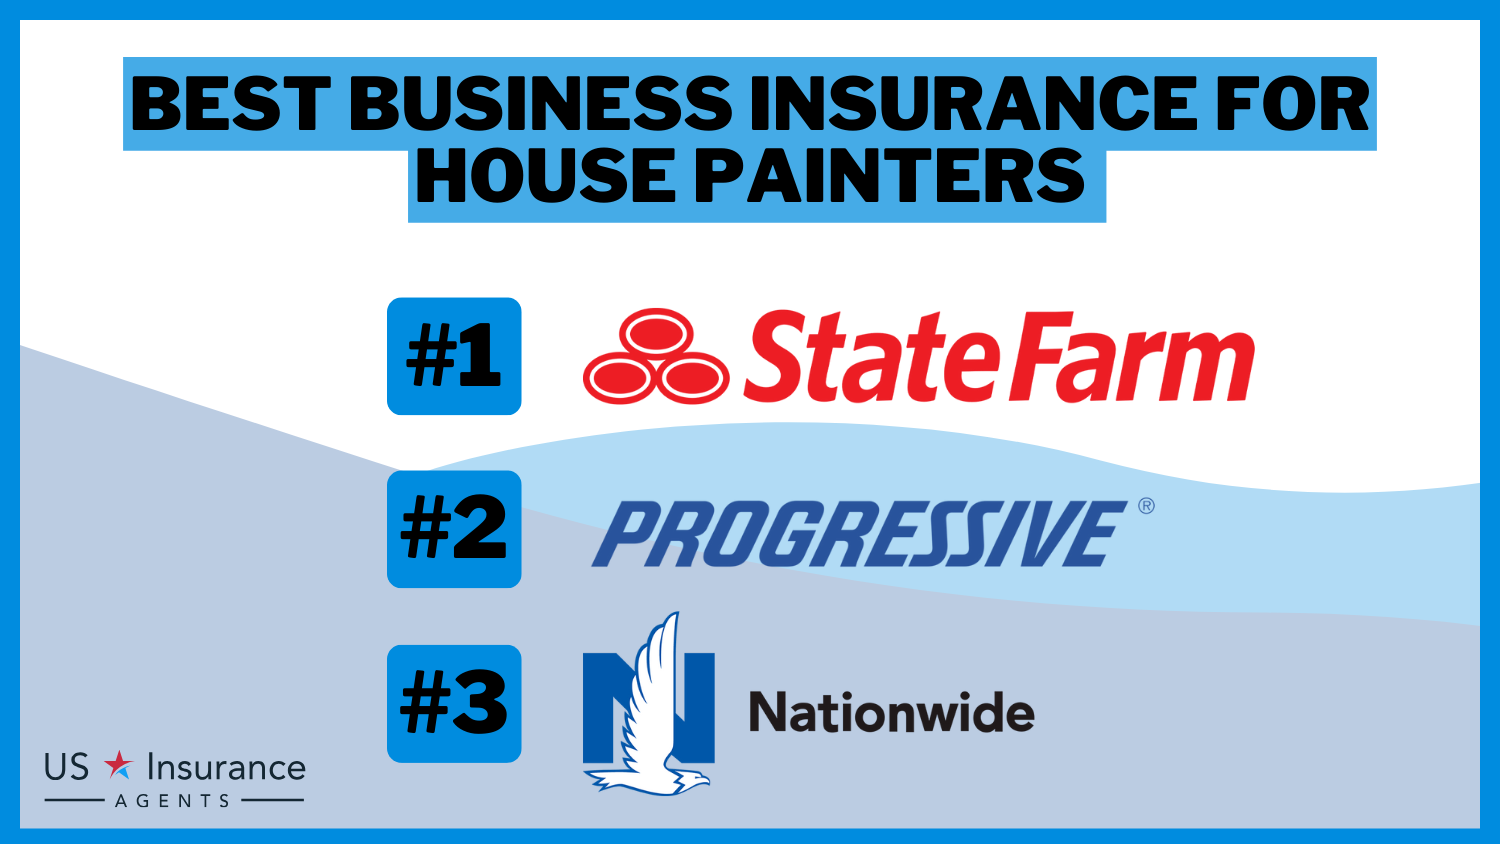 Best Business Insurance for House Painters: State Farm, Progressive and Nationwide.